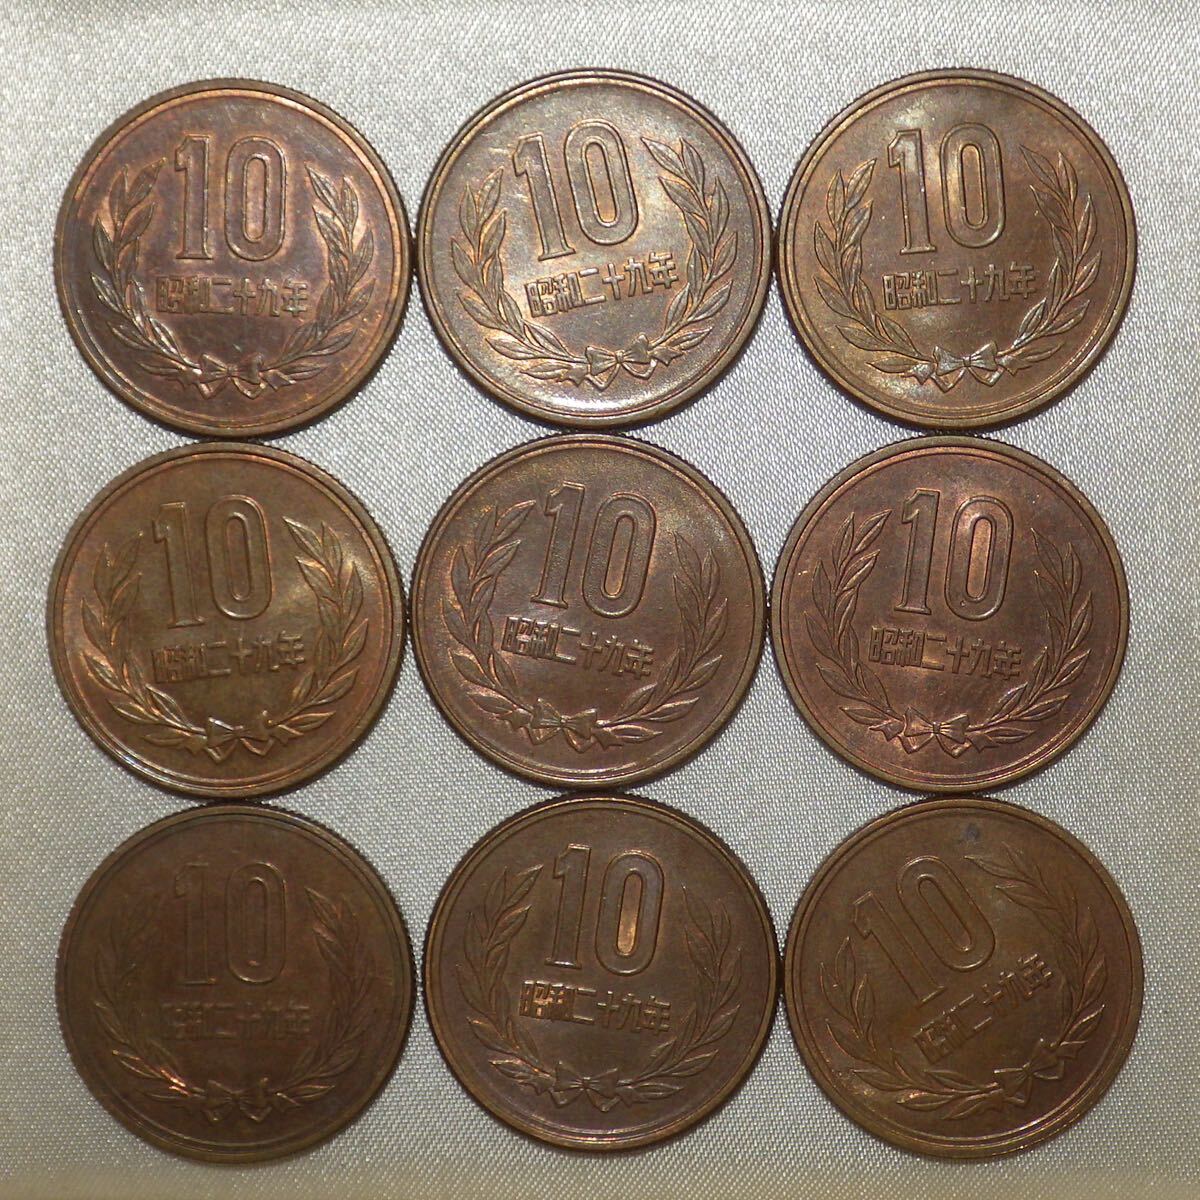 01. Showa era 29 year 10 jpy blue copper coin . not yet ~ unused -BN 9 sheets set 